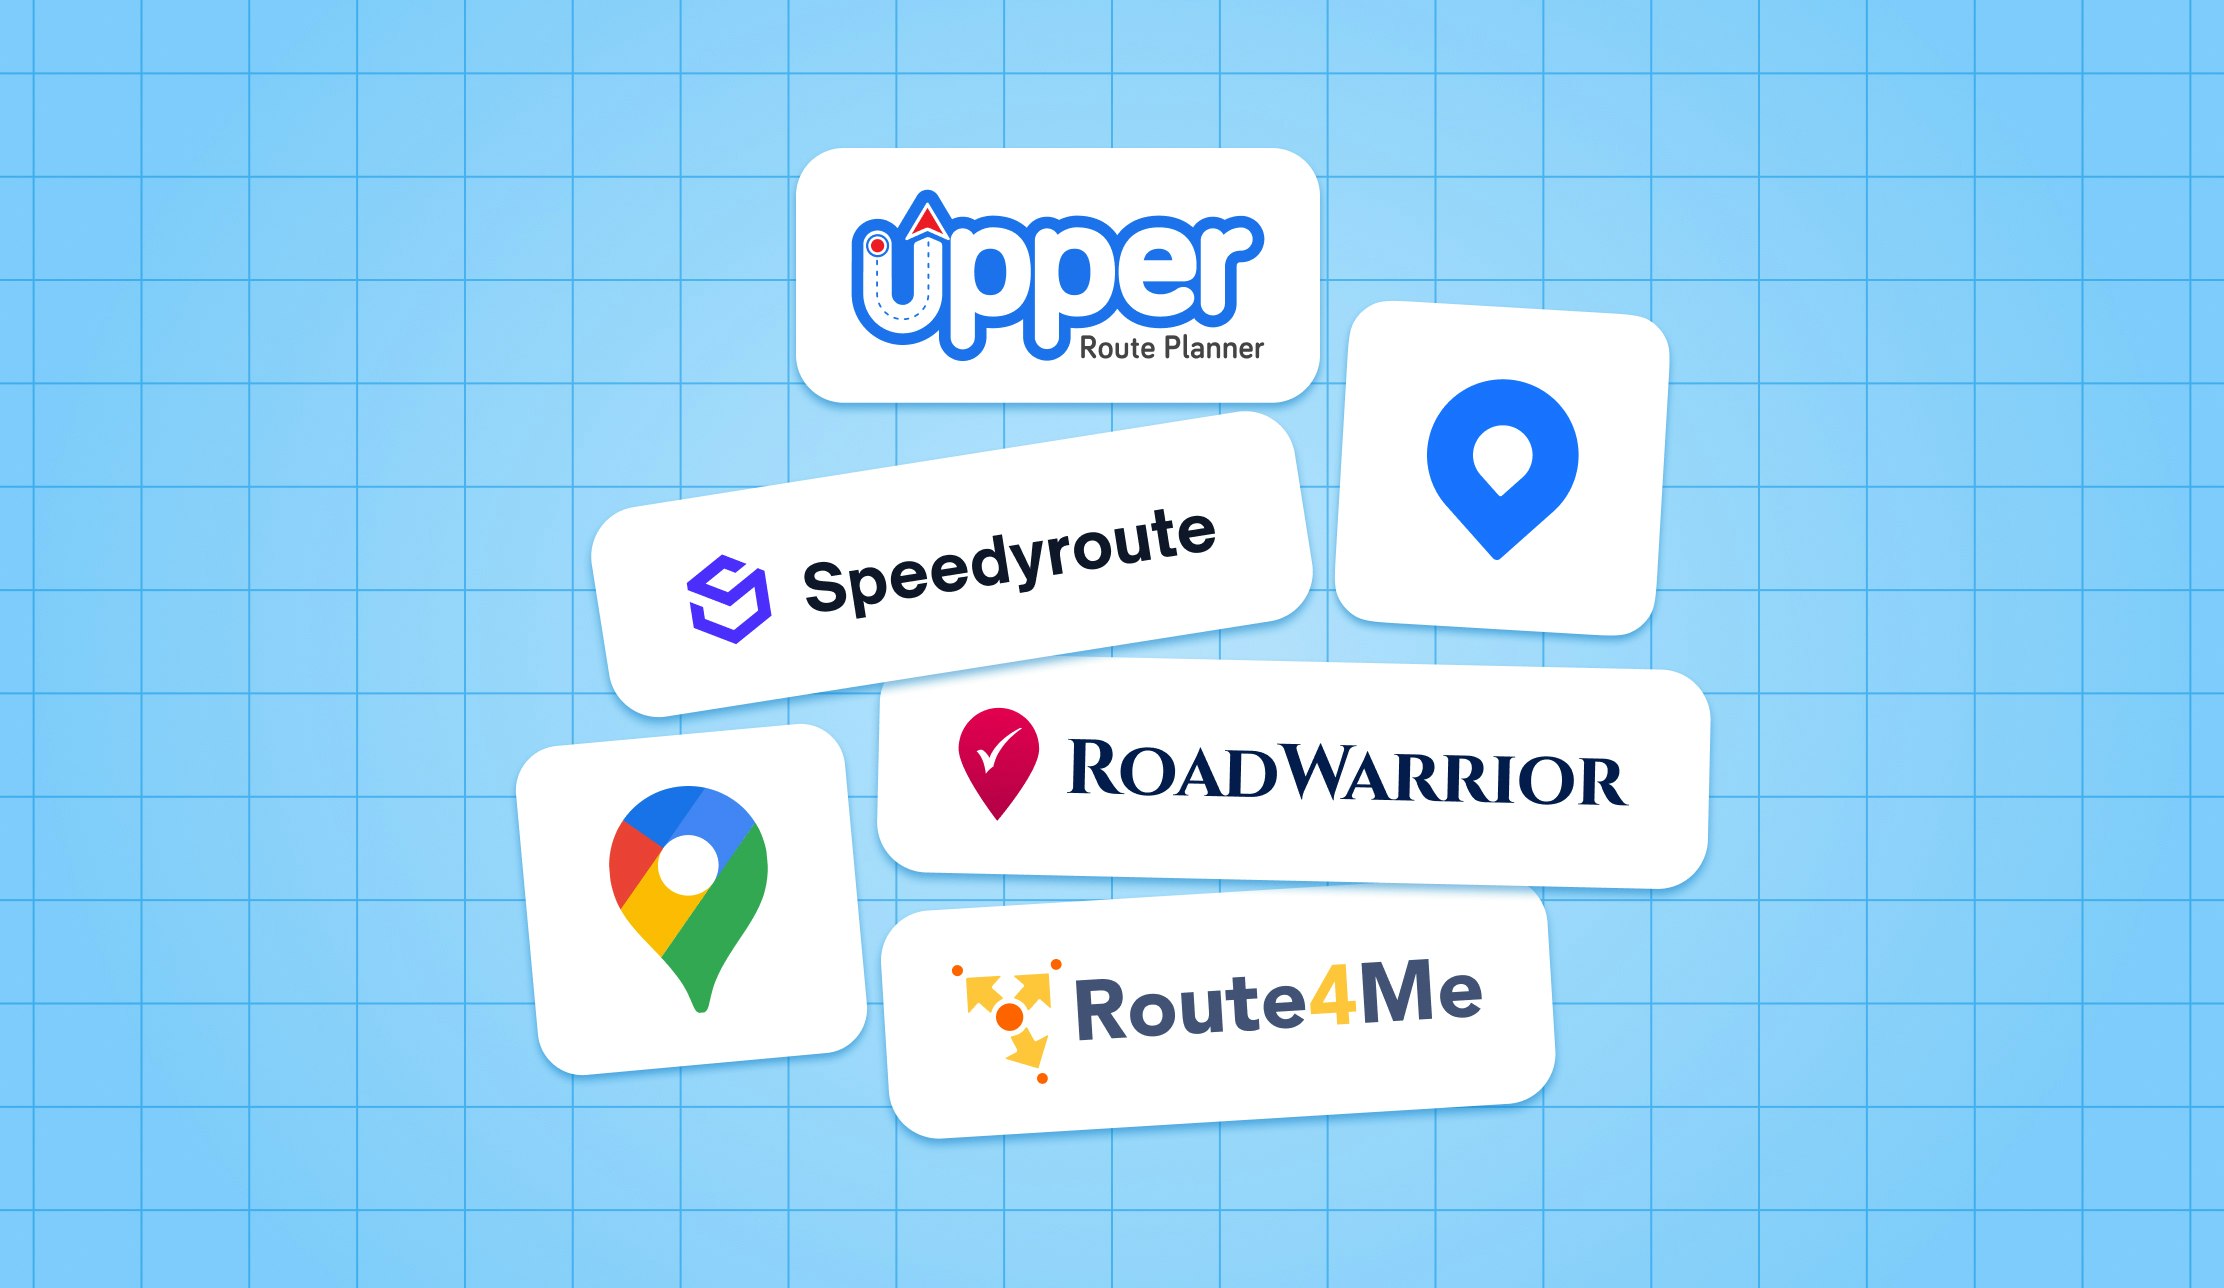 Logos for Circuit Route Planner, Upper Solo, Speedyroute, RoadWarrior, Google Maps, and Route4Me